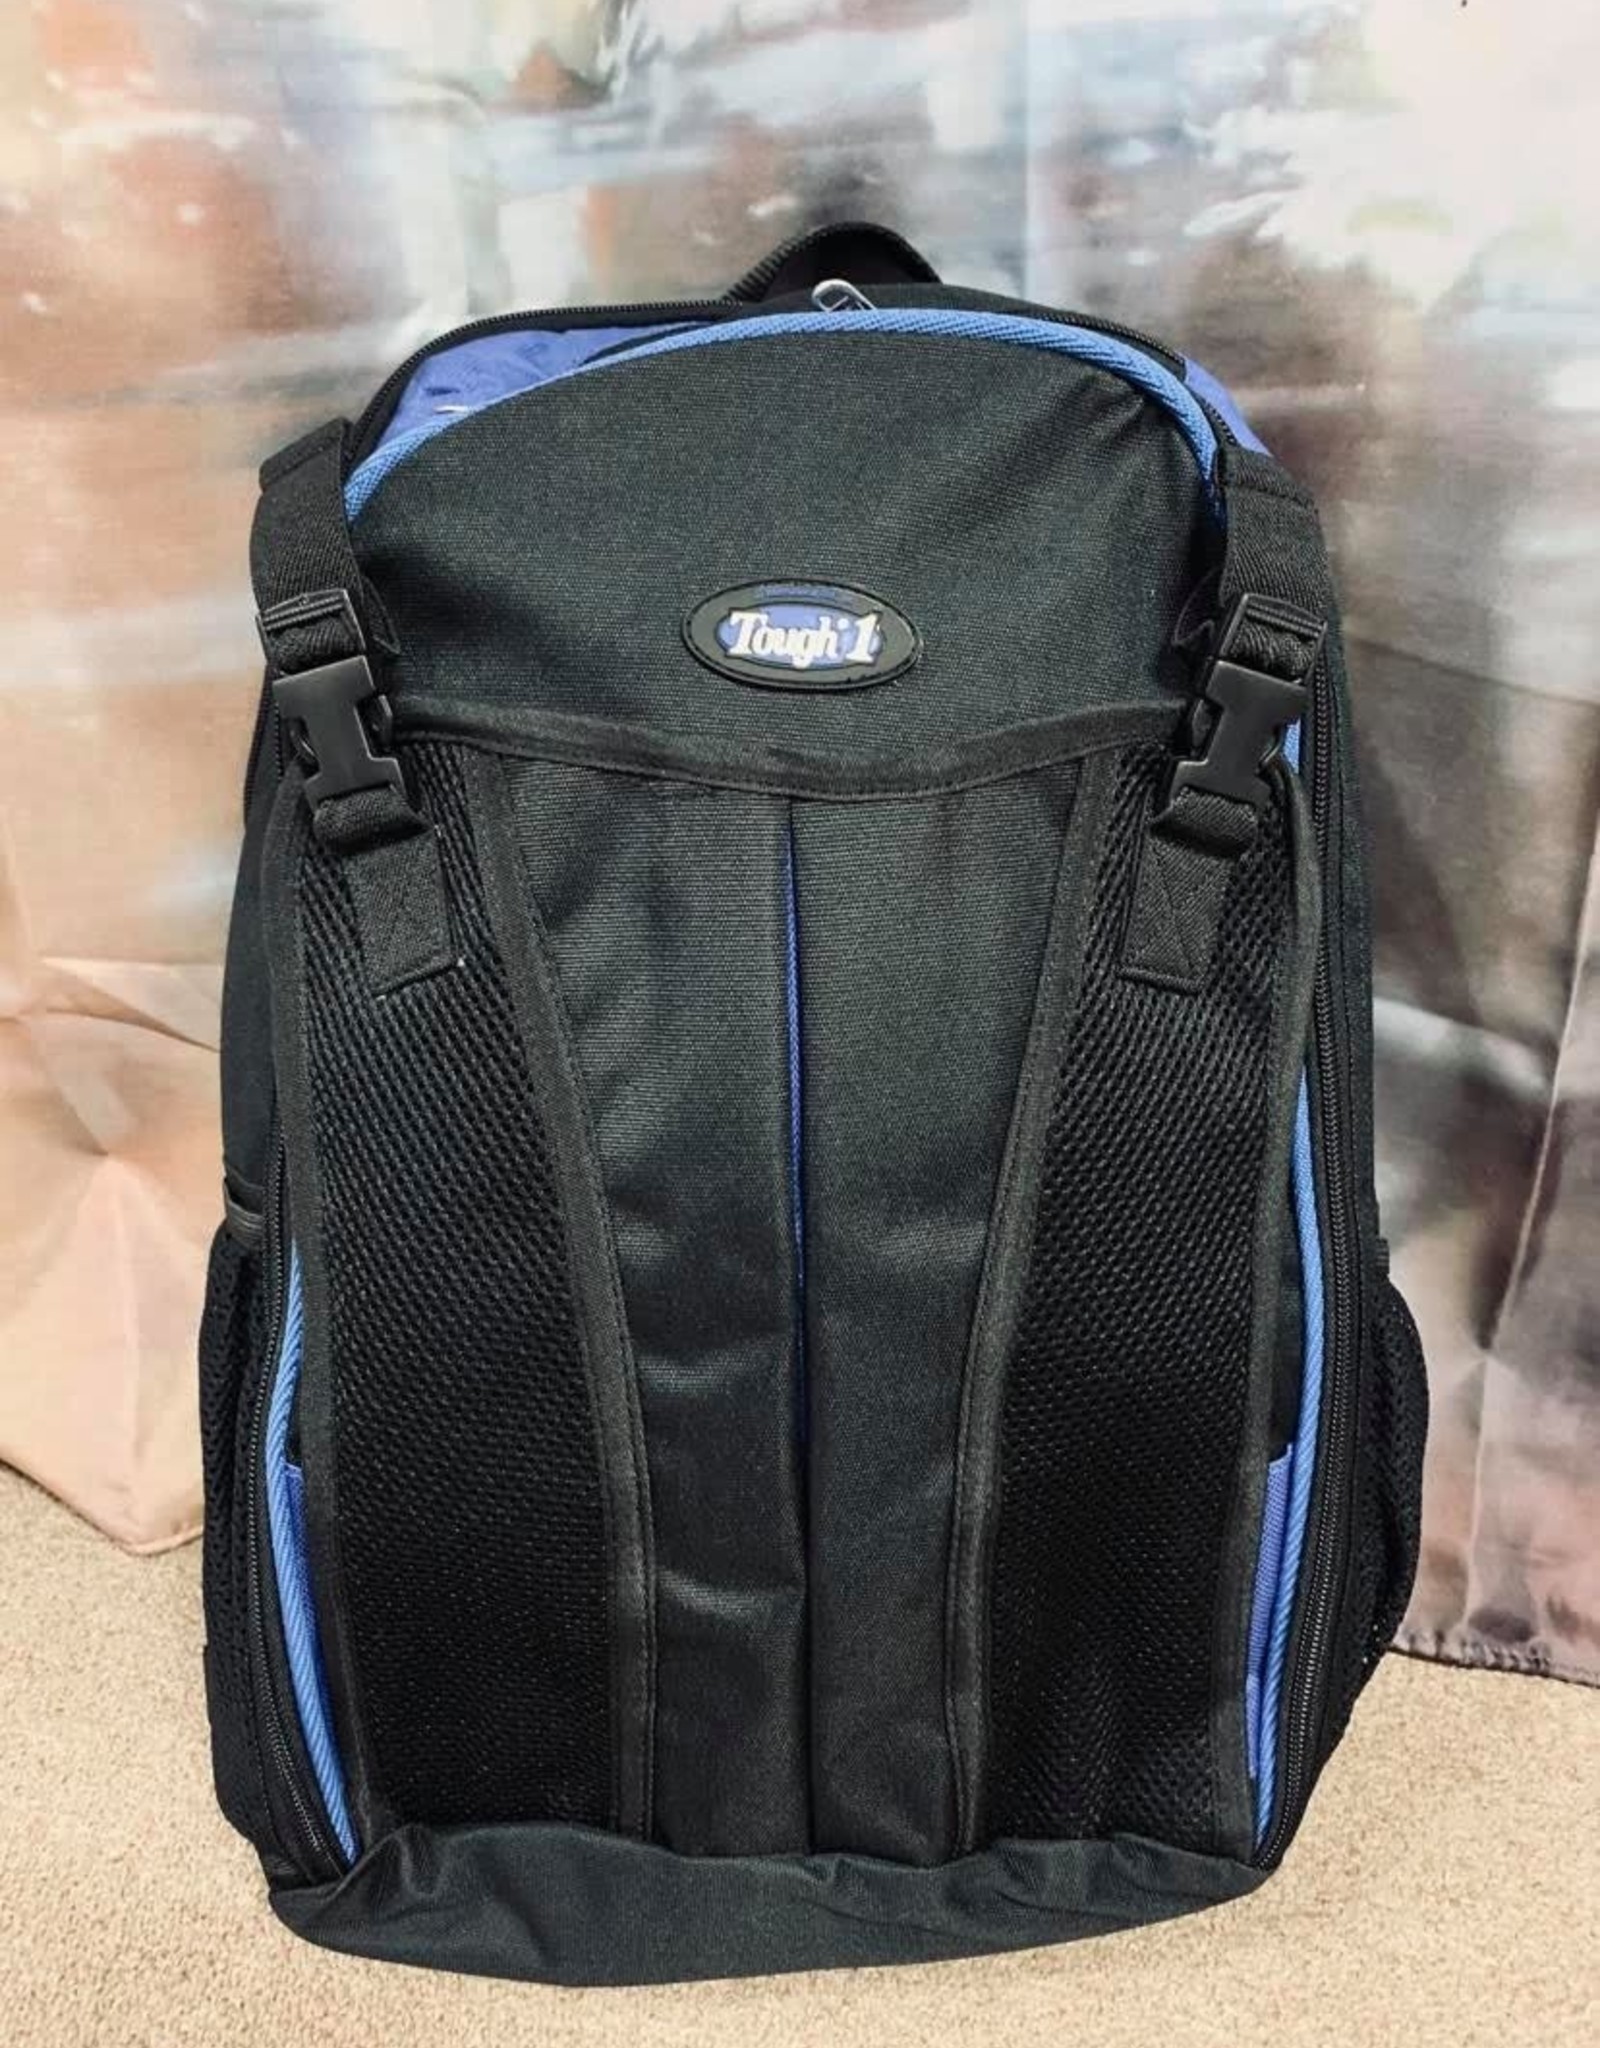 Tough 1 Gear Backpack with Helmet Pocket